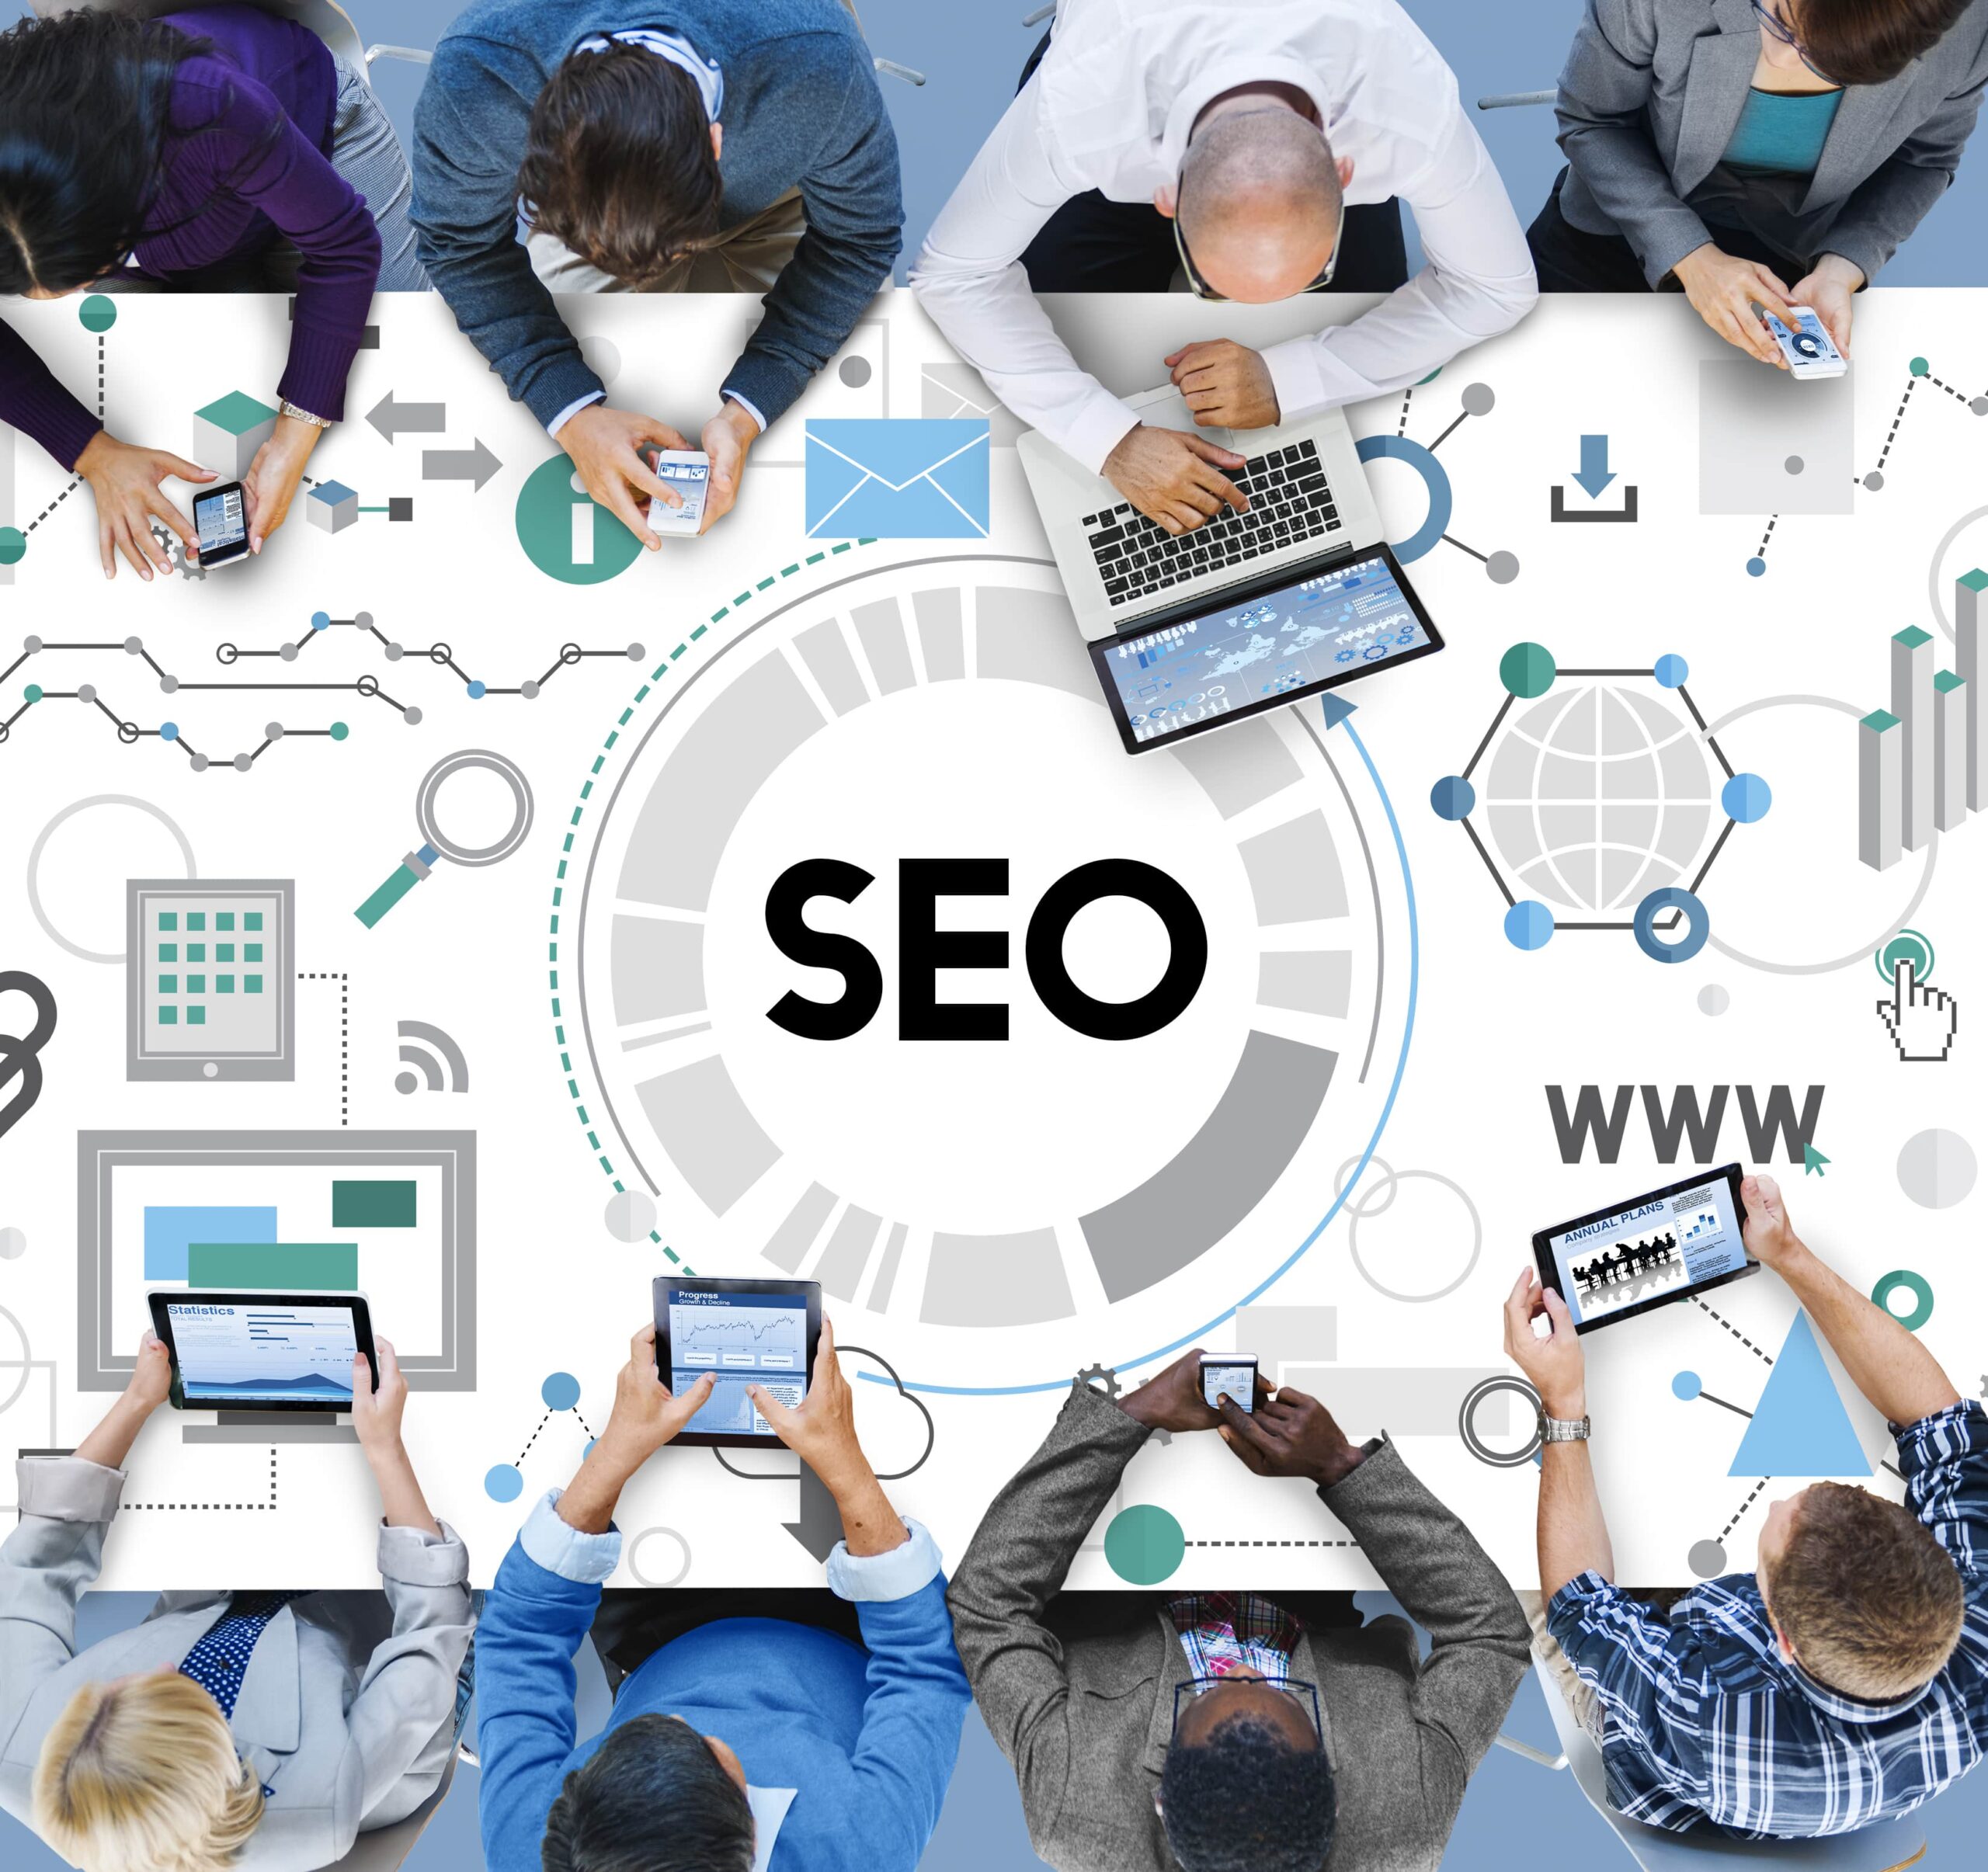 The best SEO services provider company in London